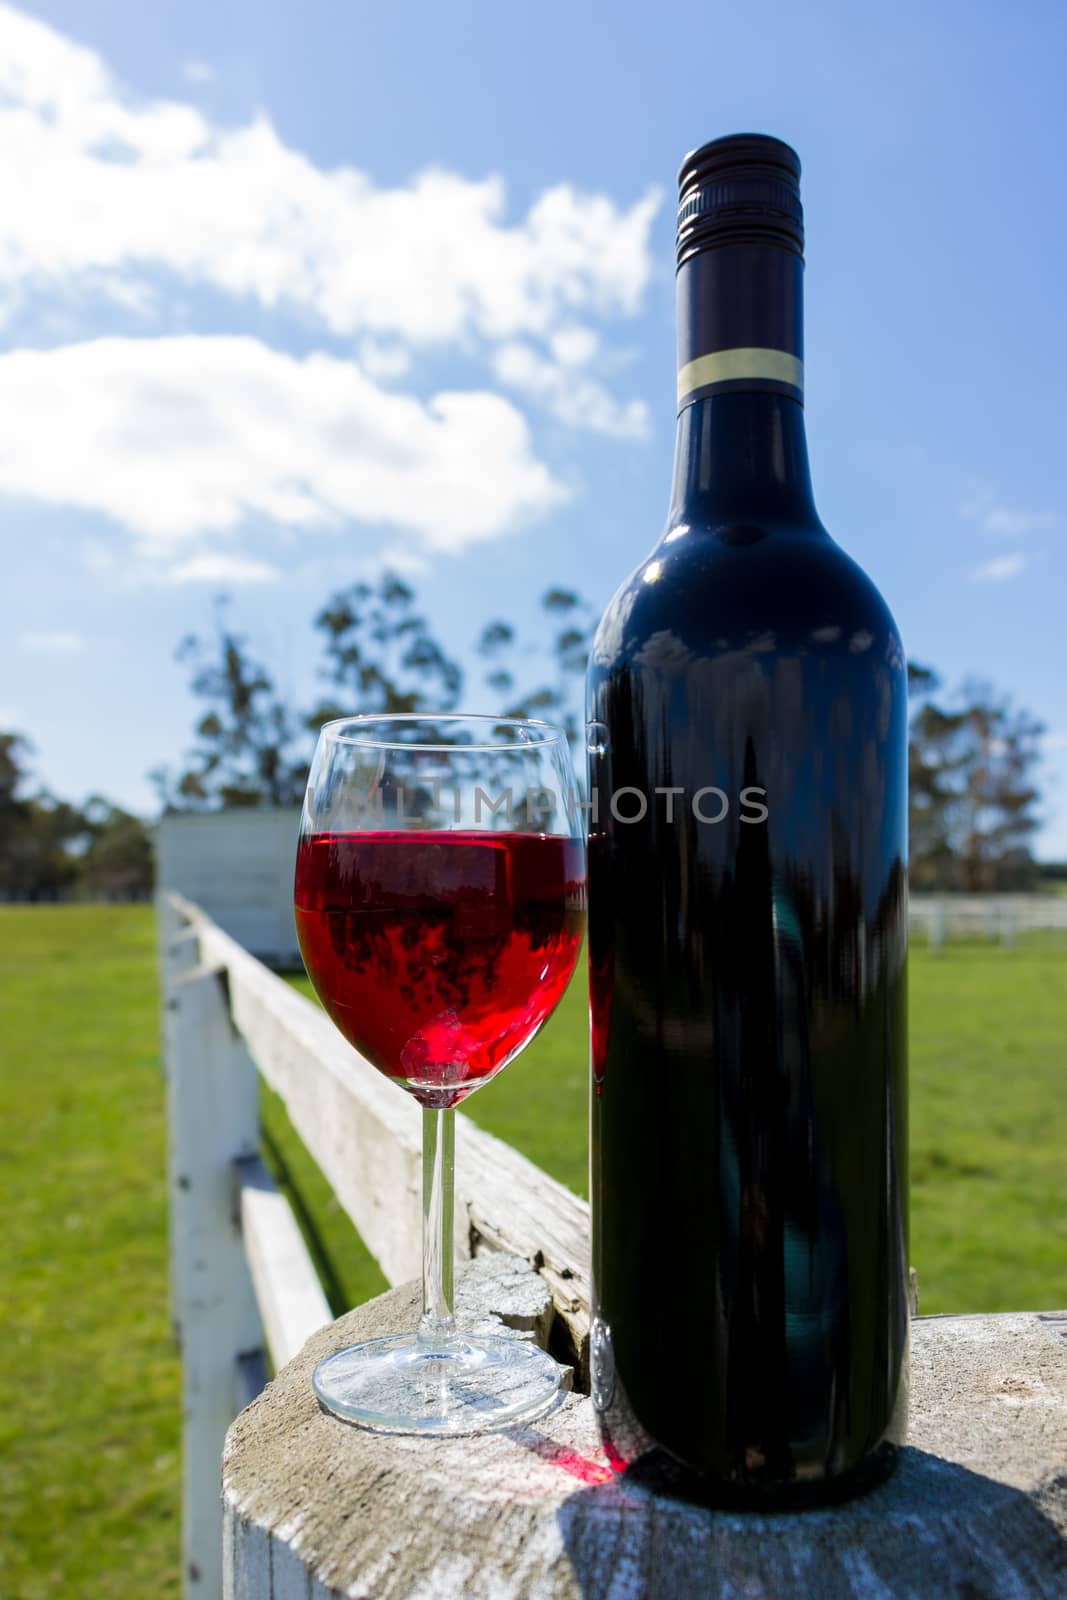 A red wine bottle and glass resting on a white fence in the country.